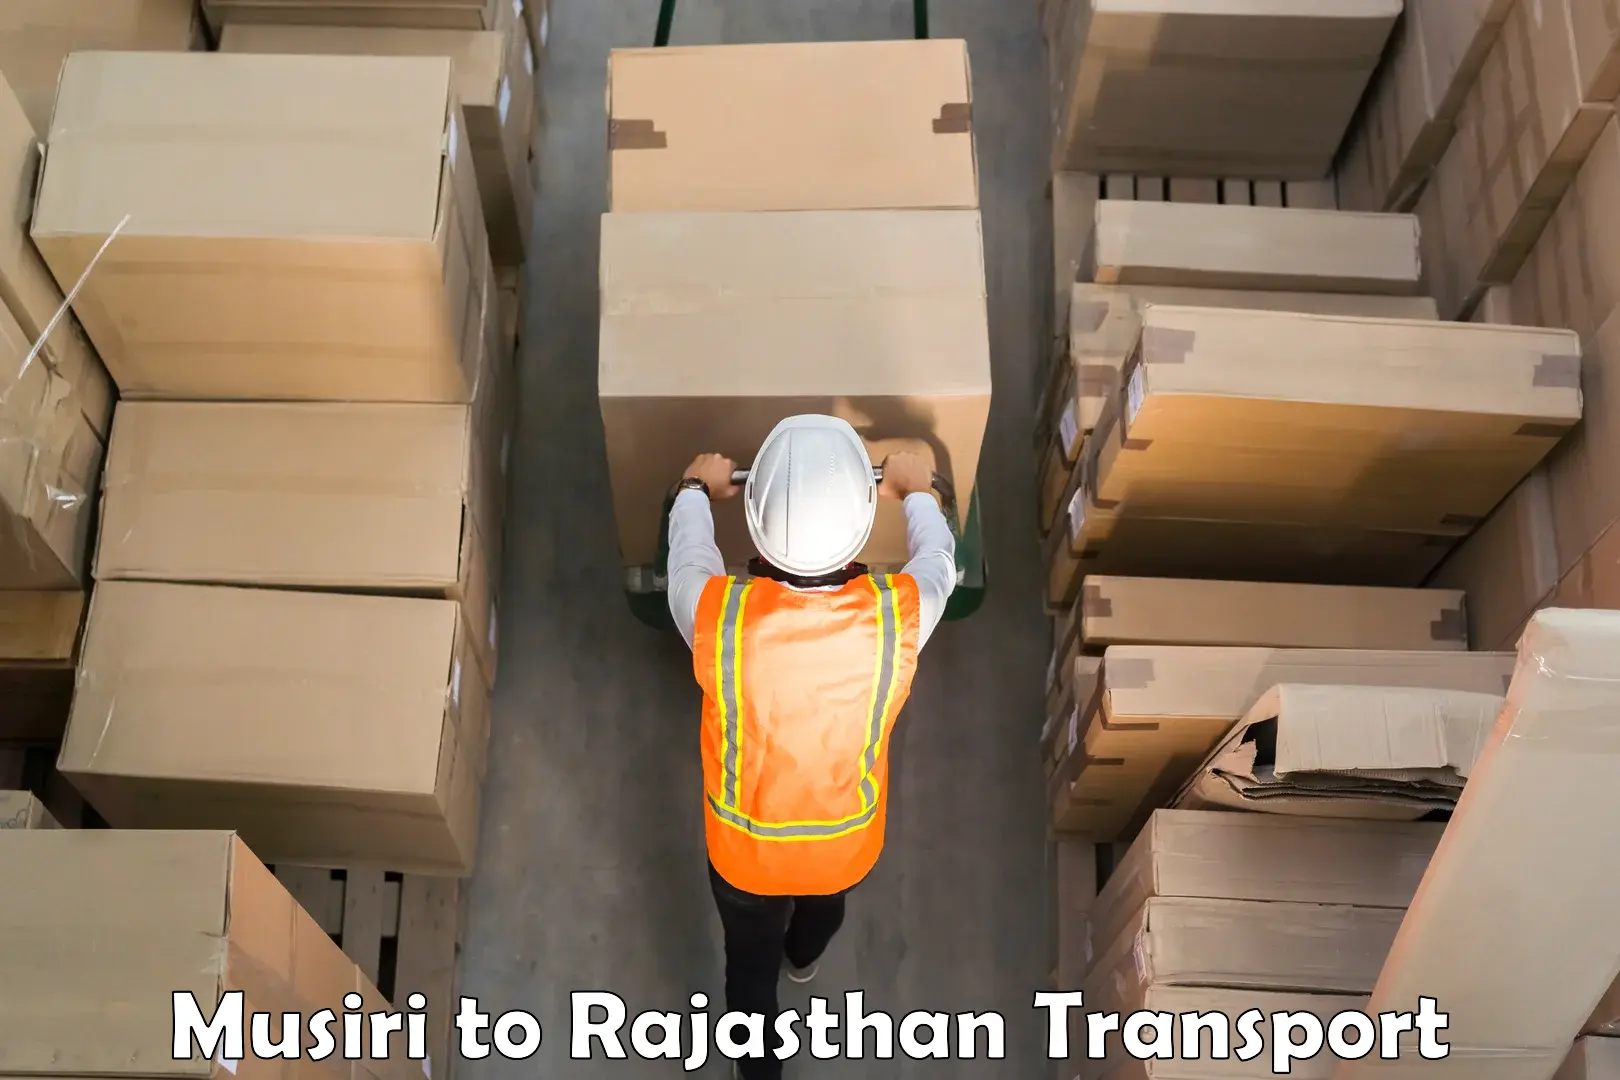 Air freight transport services Musiri to Jaipur